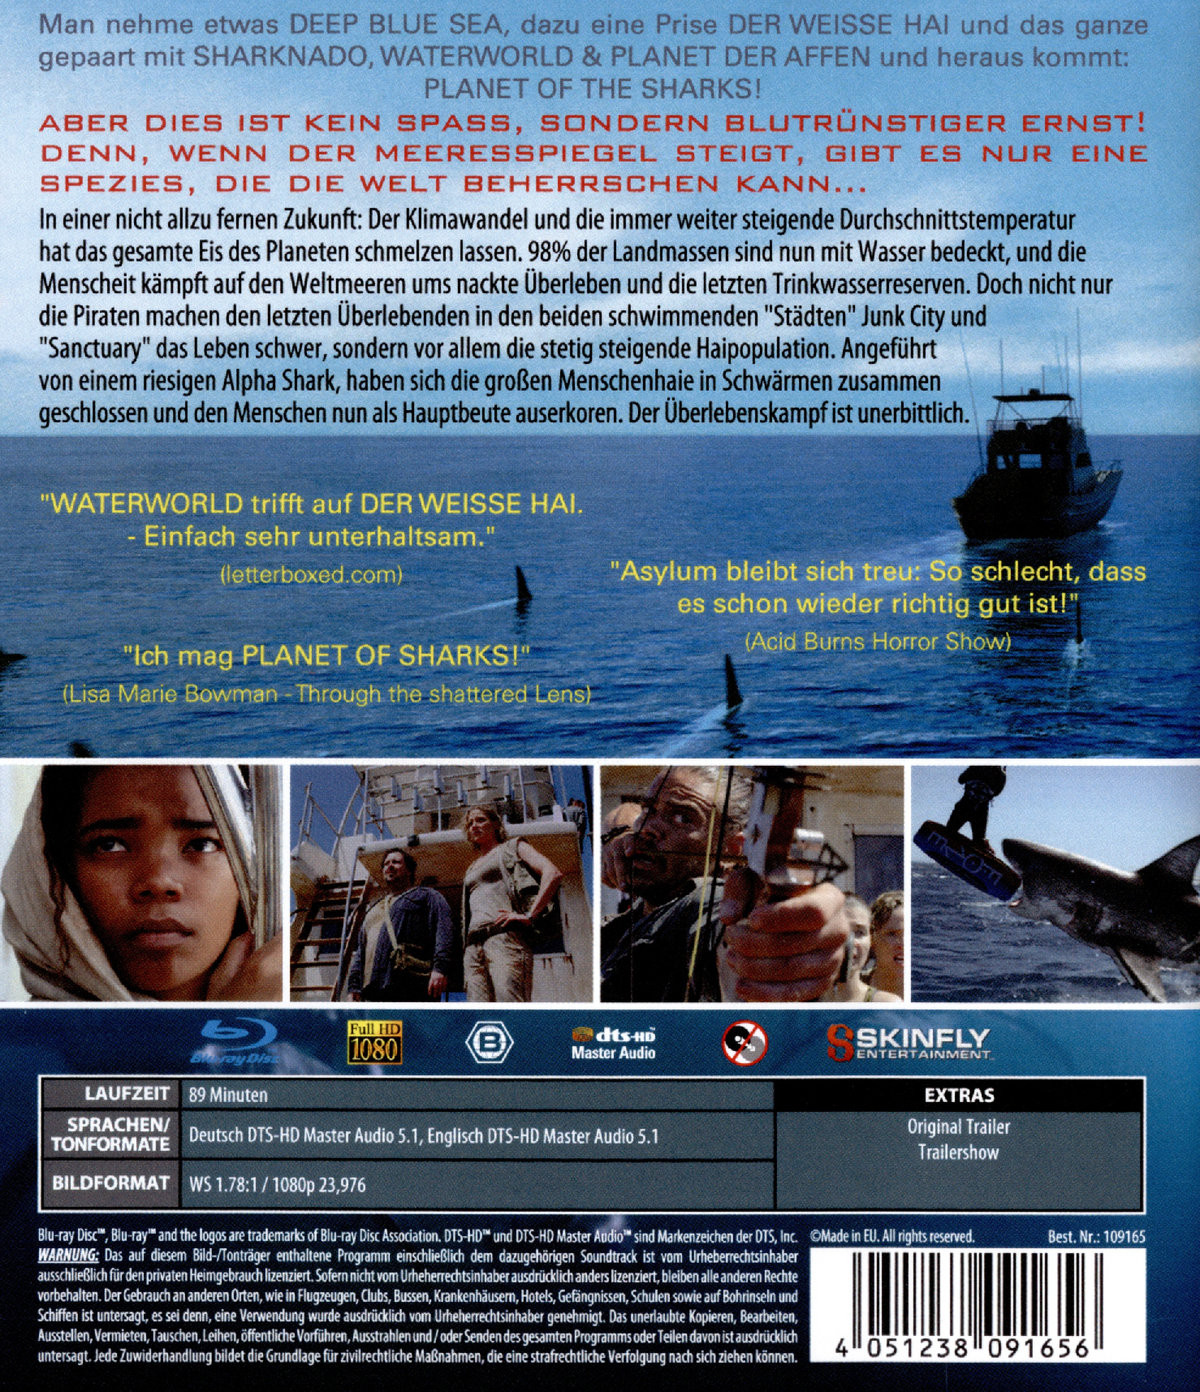 Planet of the Sharks - Uncut Edition (Best of Hai-Shocker)  (Blu-ray Disc)